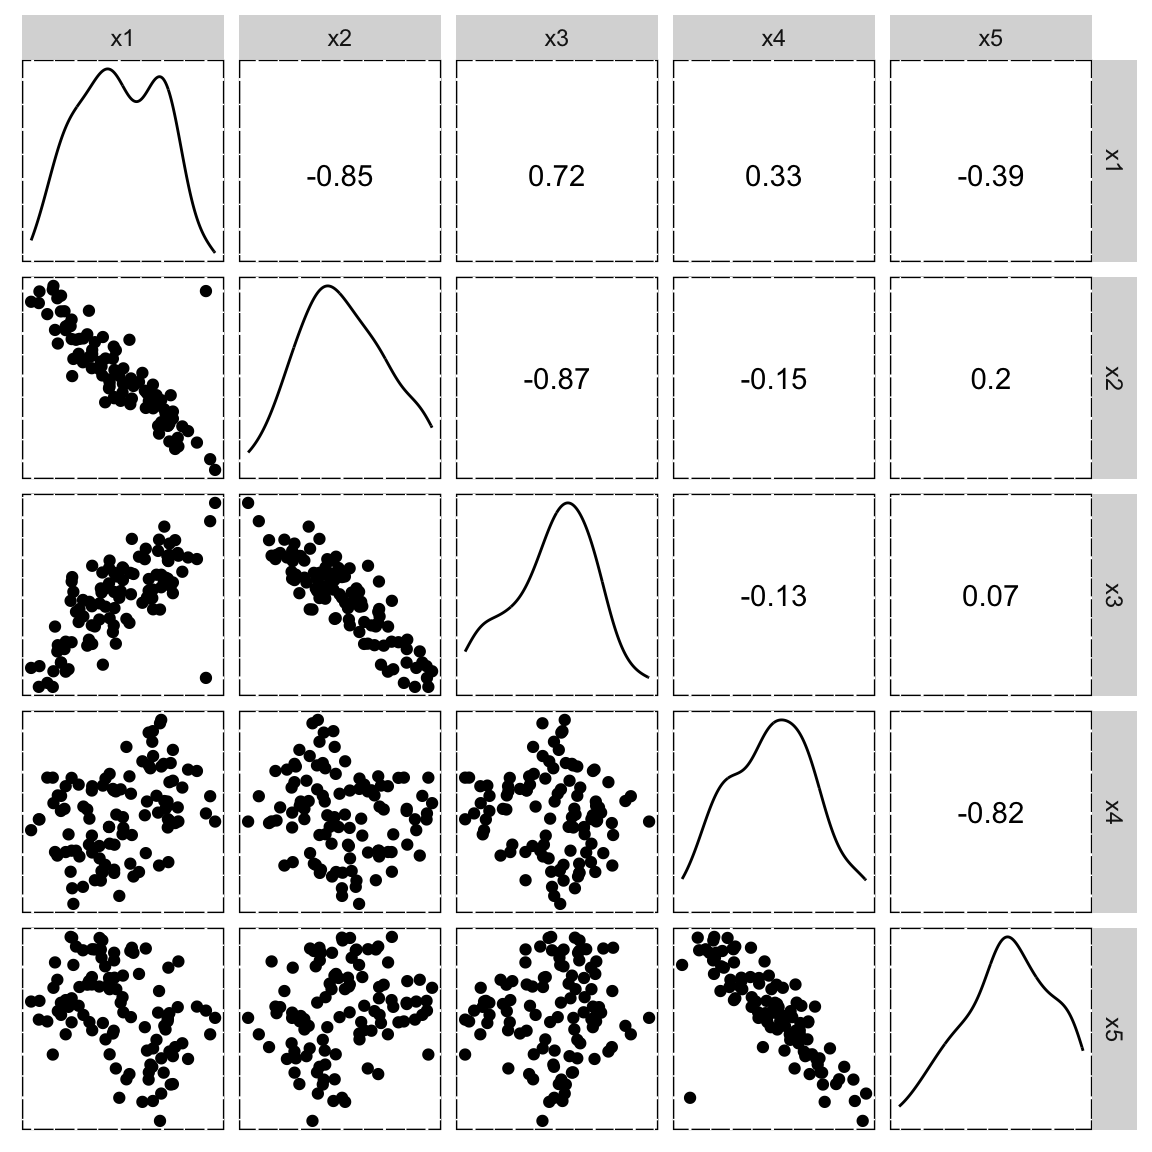 A five-by-five scatterplot matrix, with scatterplots in the lower triangle, correlaton printed in the upper triangle and density plots shown on the diagonal. Plots of x1 vs x2, x1 vs x3, x2 vs x3, and x4 vs x5 have strong positive or negative correlation, with an outlier in the corner of the plot. The remaining pairs of variables have no association, and thus also no outliers.